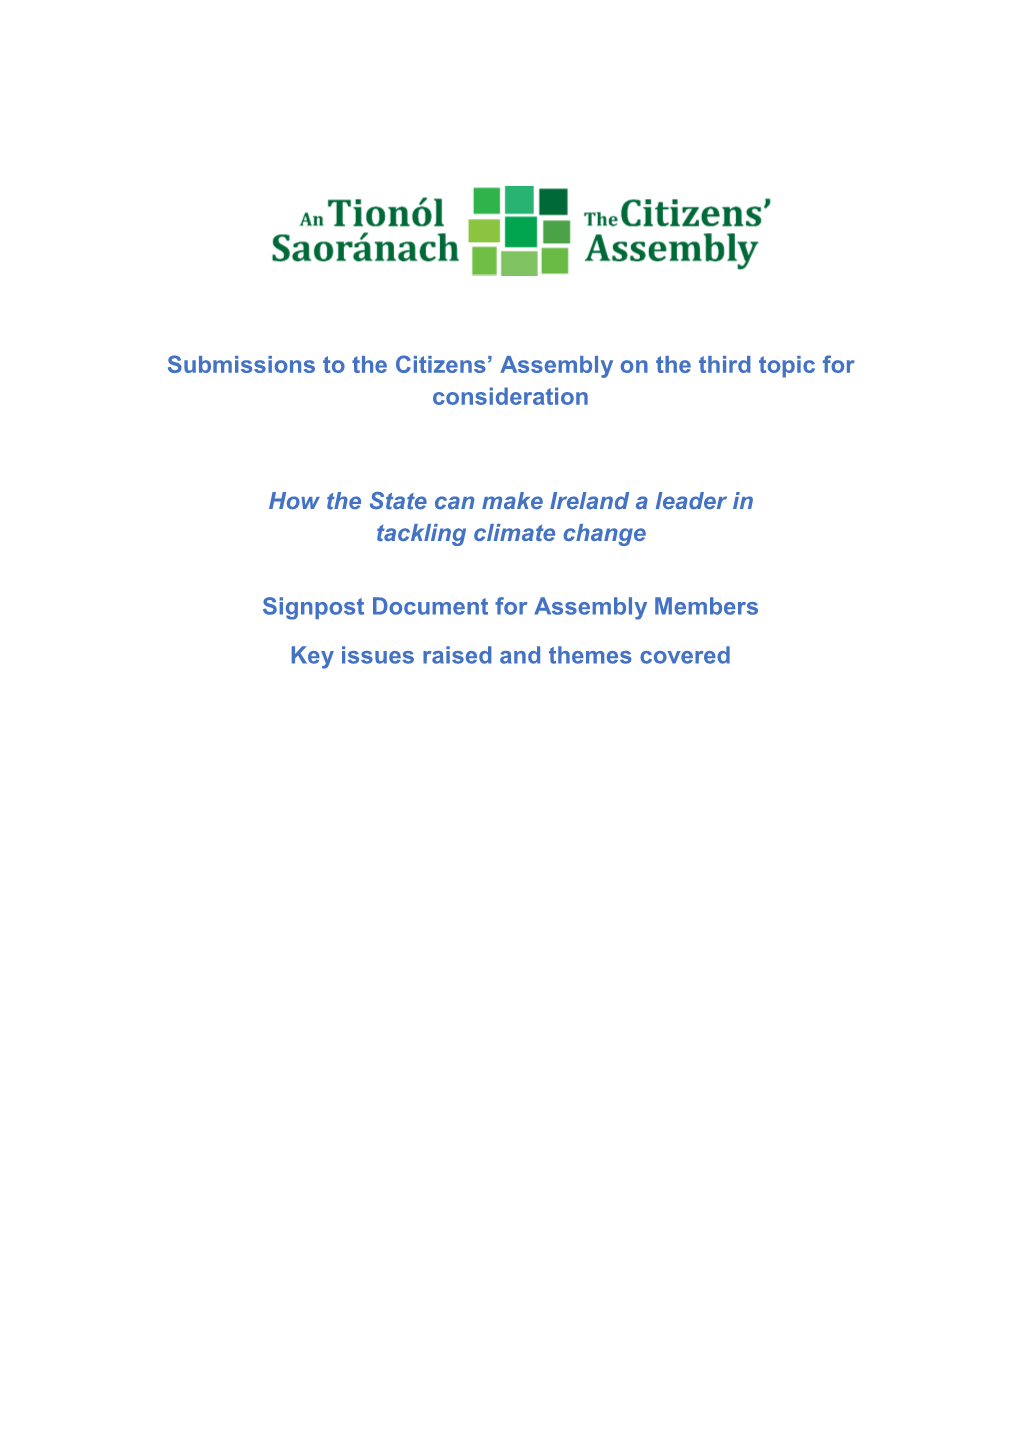 Submissions to the Citizens' Assembly on the Third Topic for Consideration